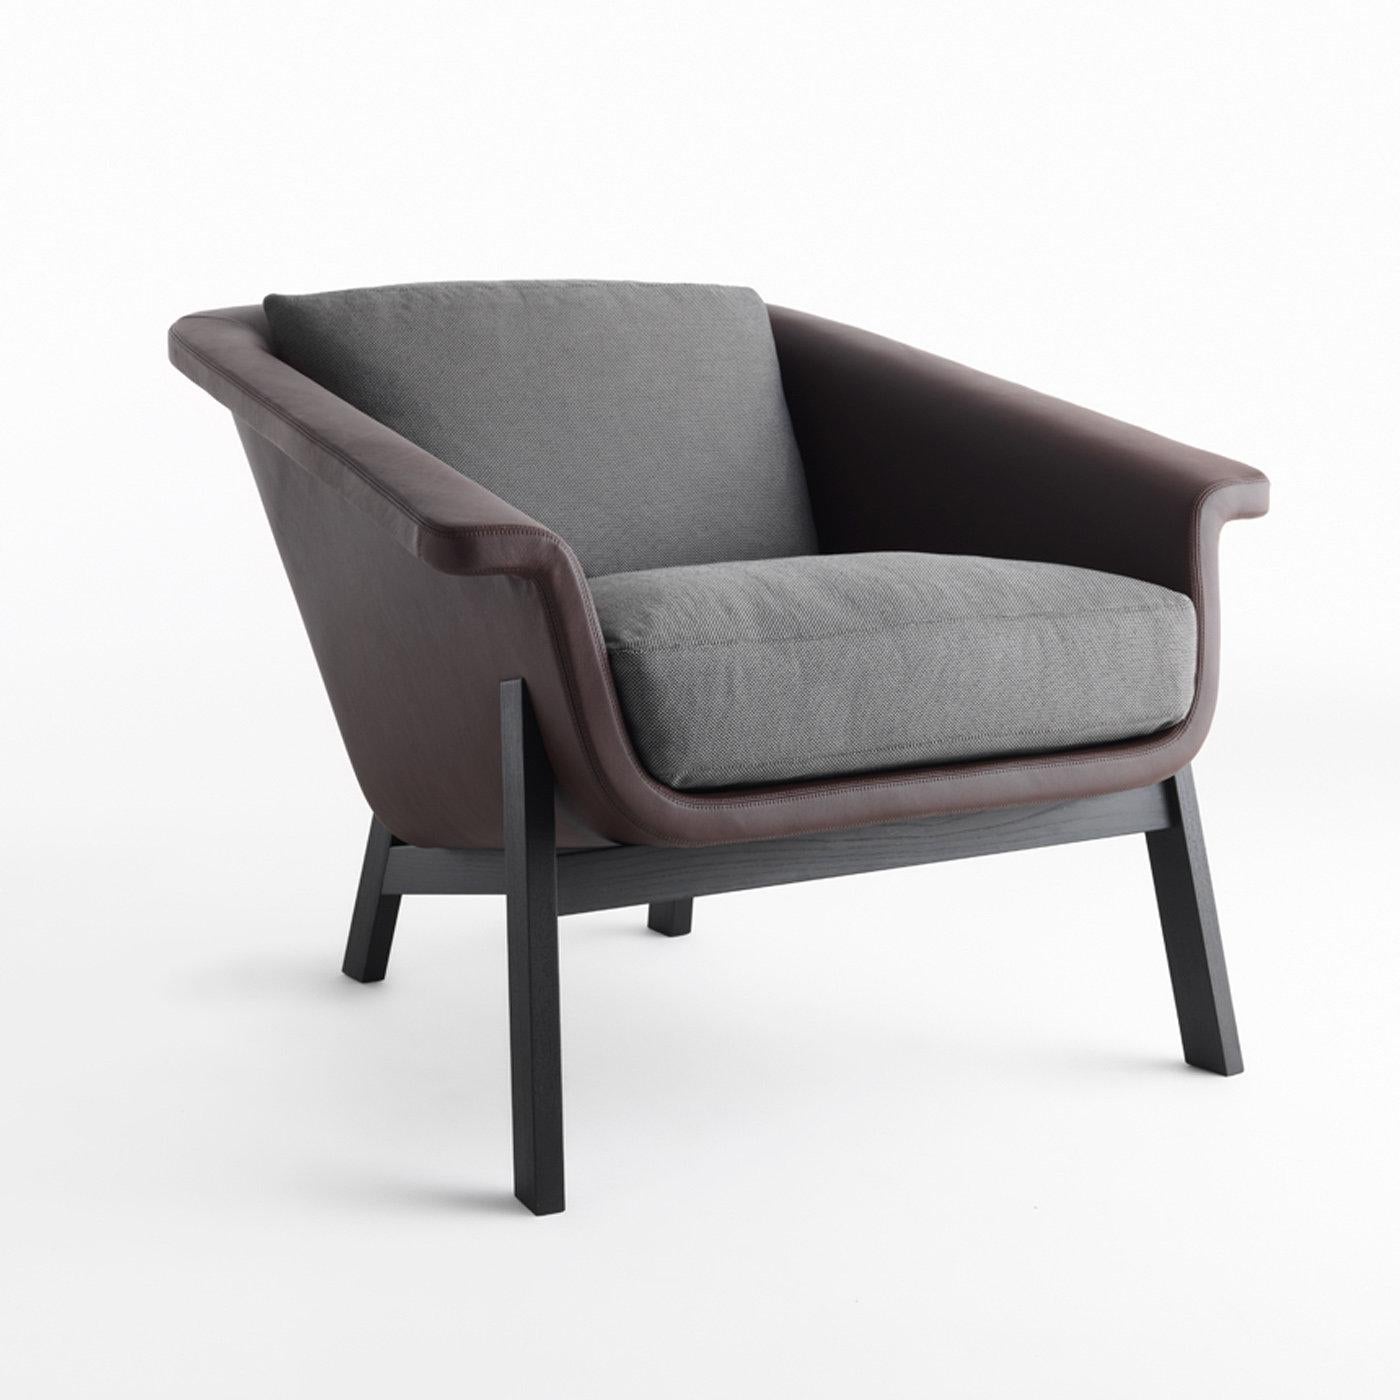 Inspired by the clean and essential Scandinavian style of the 1970s, this elegant armchair designed by Studio Balutto will perfectly suit a modern or minimalist interior. Resting on a black-finished ash wood legs, the large and welcoming